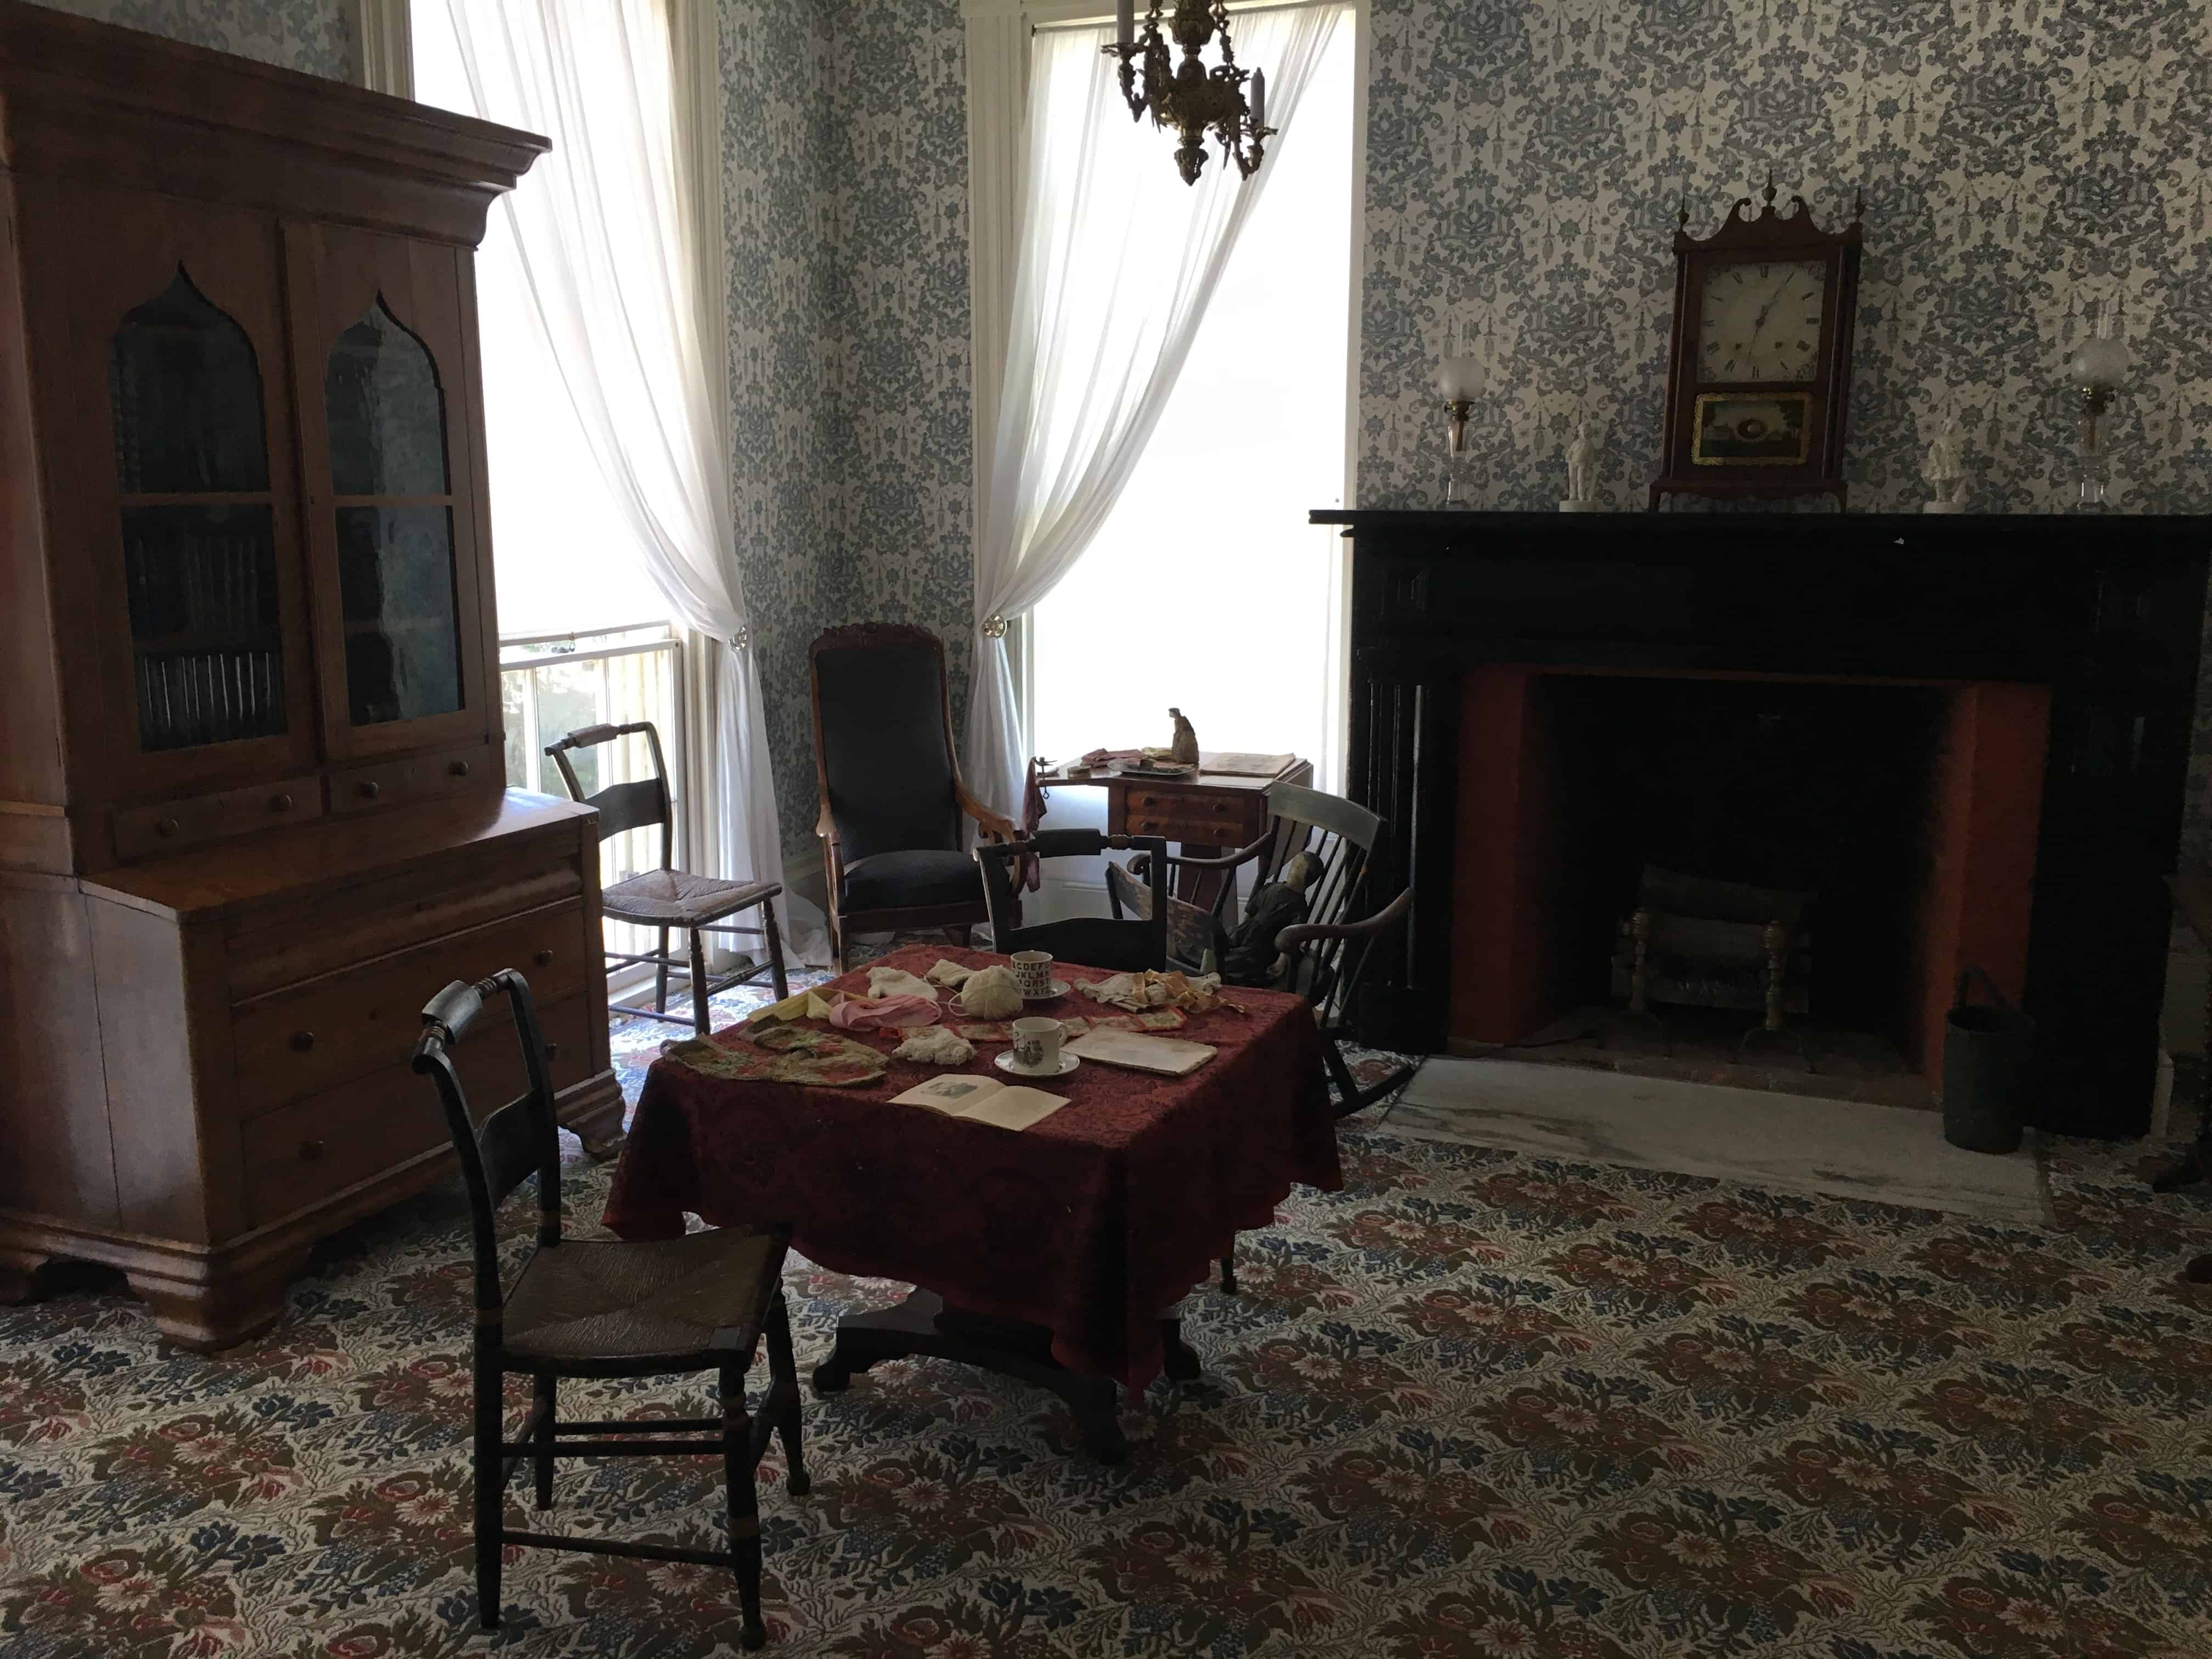 Parlor at the Henry B. Clarke House in Chicago, Illinois